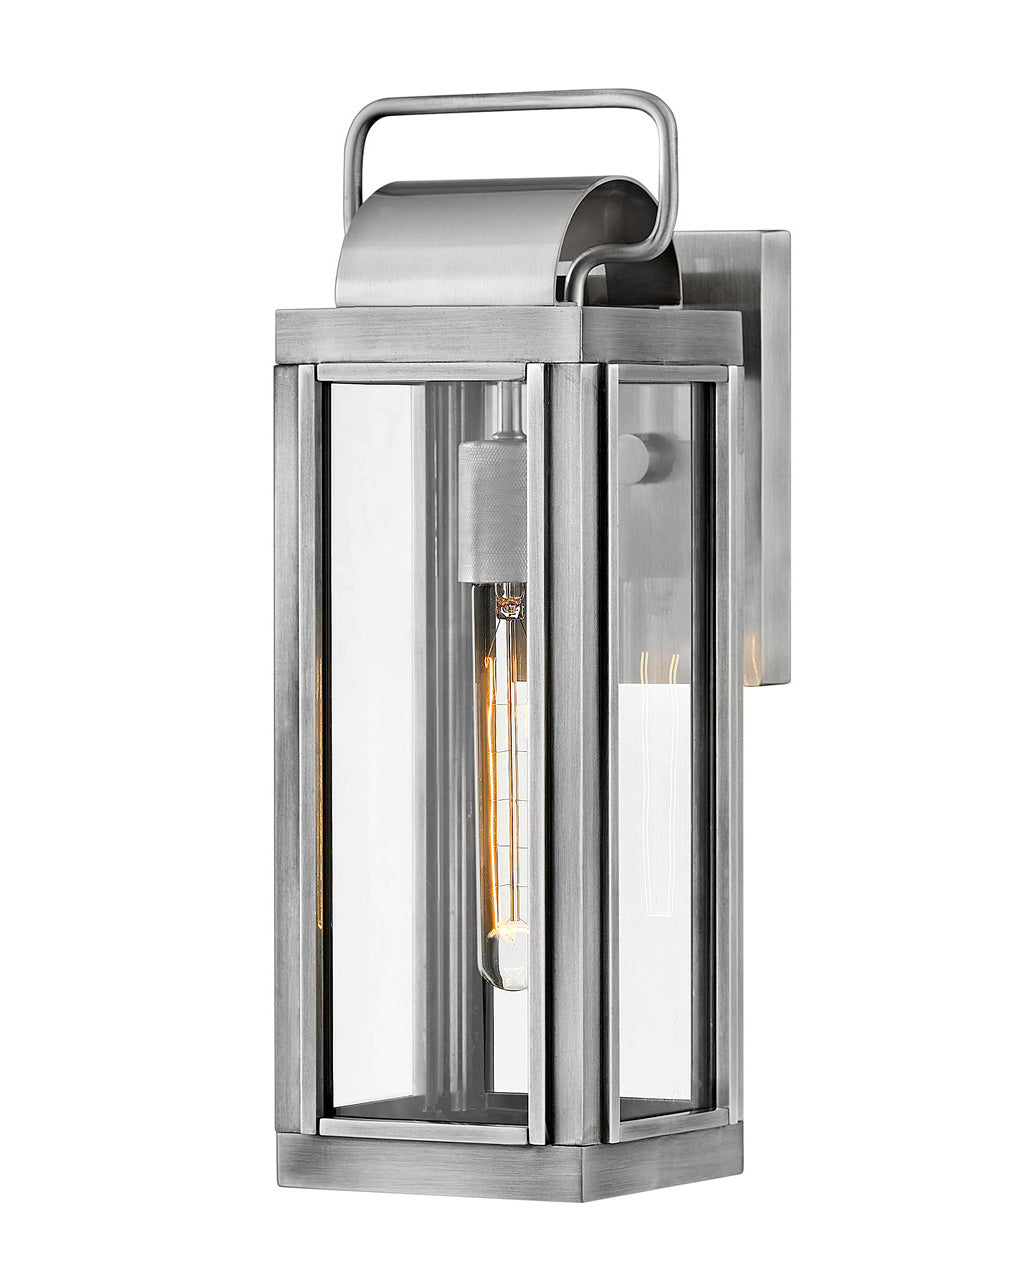 OUTDOOR SAG HARBOR Wall Mount Lantern Outdoor l Wall Hinkley Antique Brushed Aluminum 7.5x5.5x16.25 